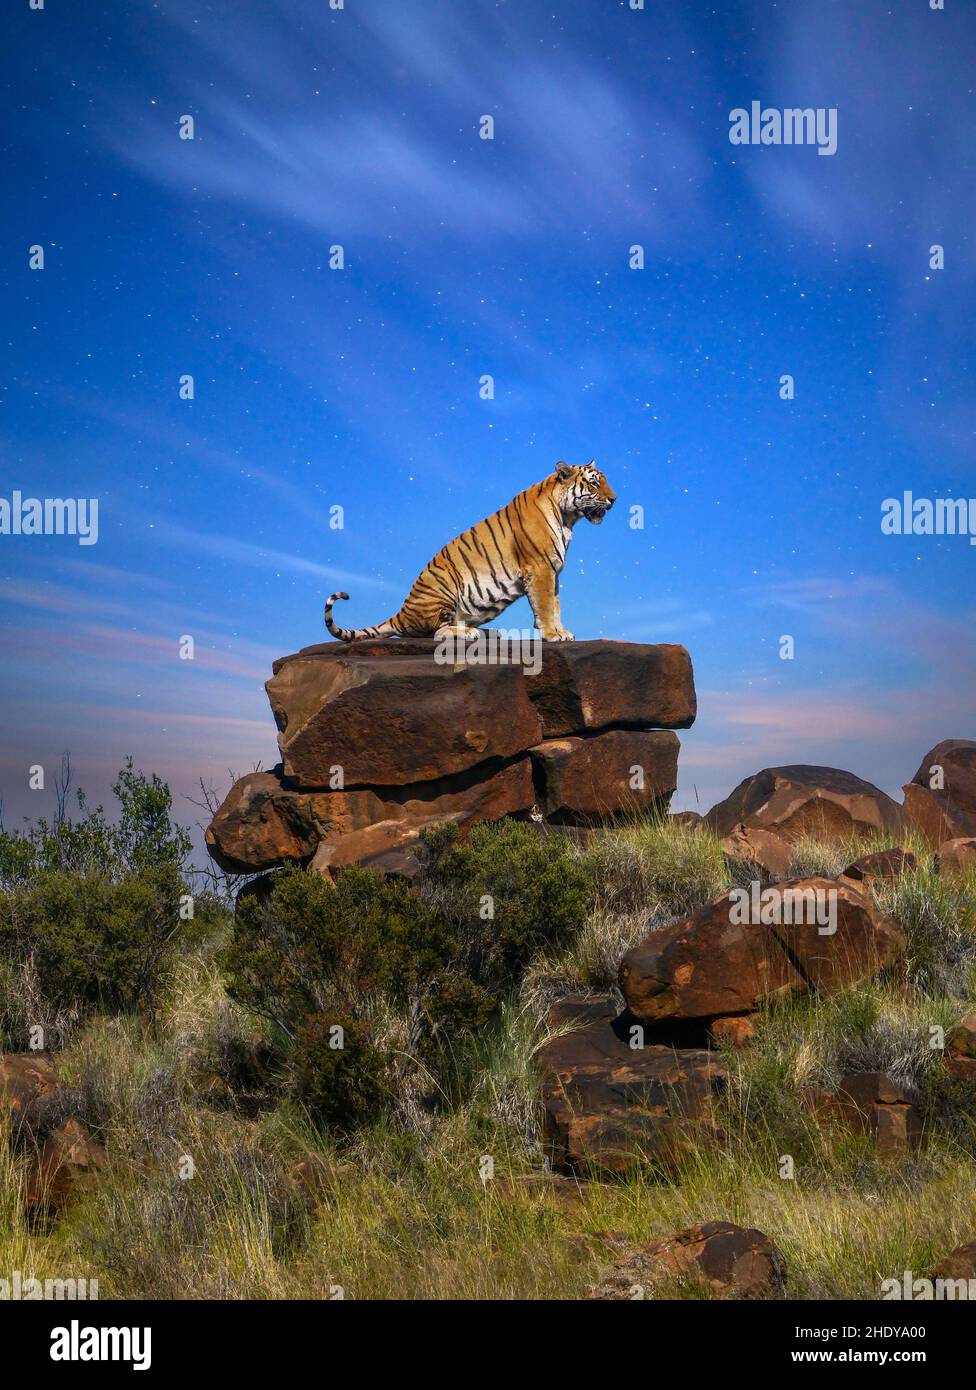 Vertical image of a large male tiger sitting in profile on a rocky outcrop surveying his territory, as the sky changes from dusk into a starry night. Stock Photo